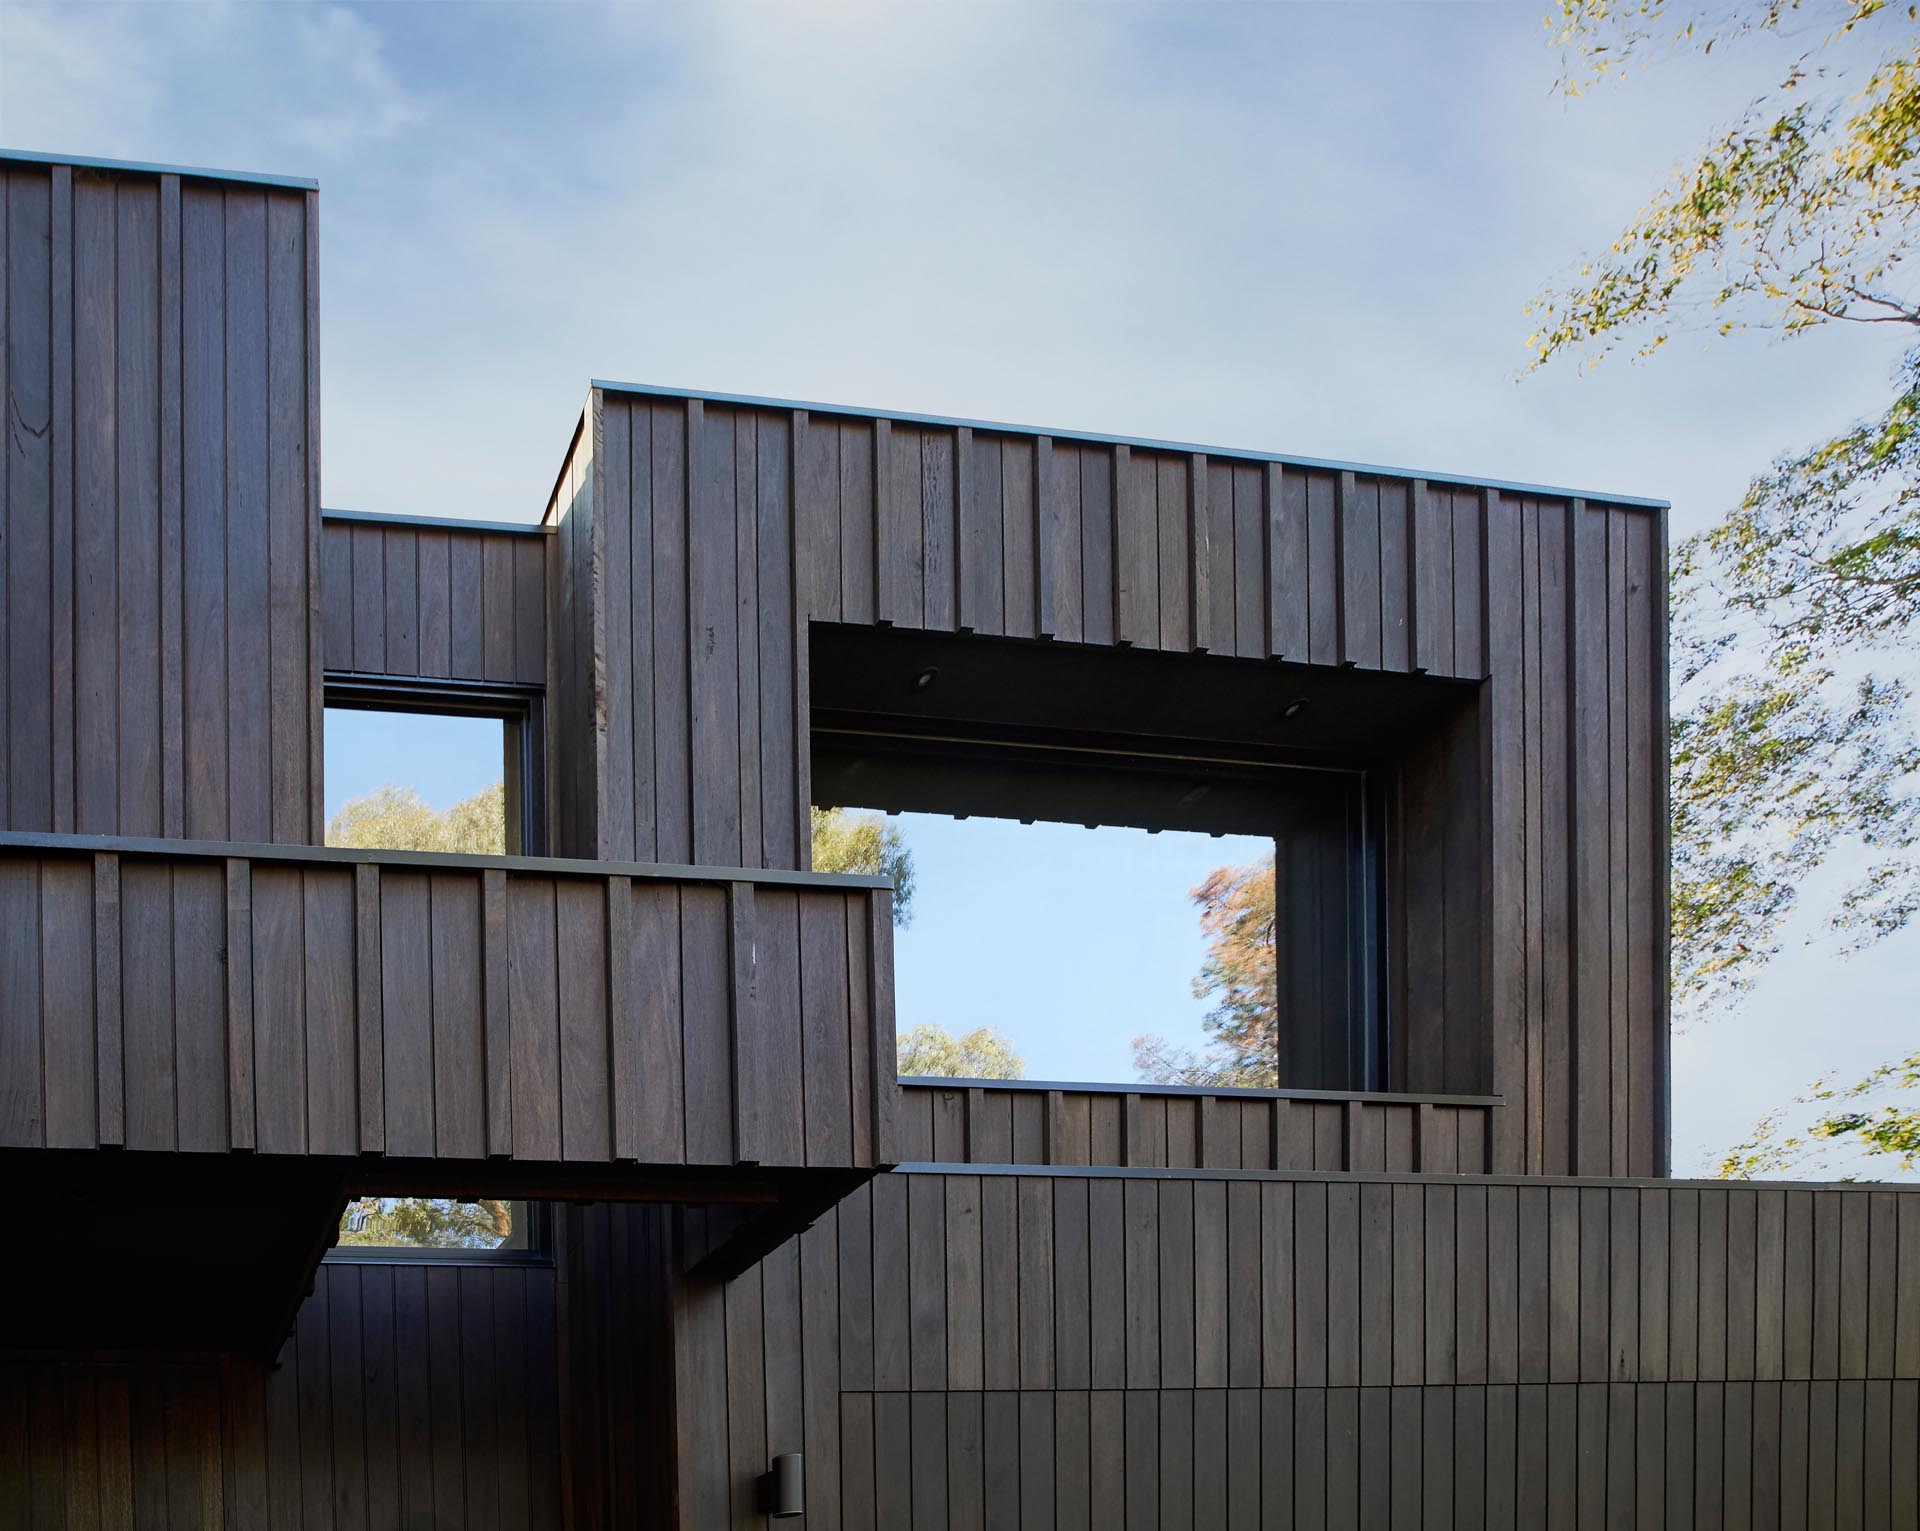 The exterior of this modern home showcases Blackbutt timber cladding that's accented by black metal window frames.